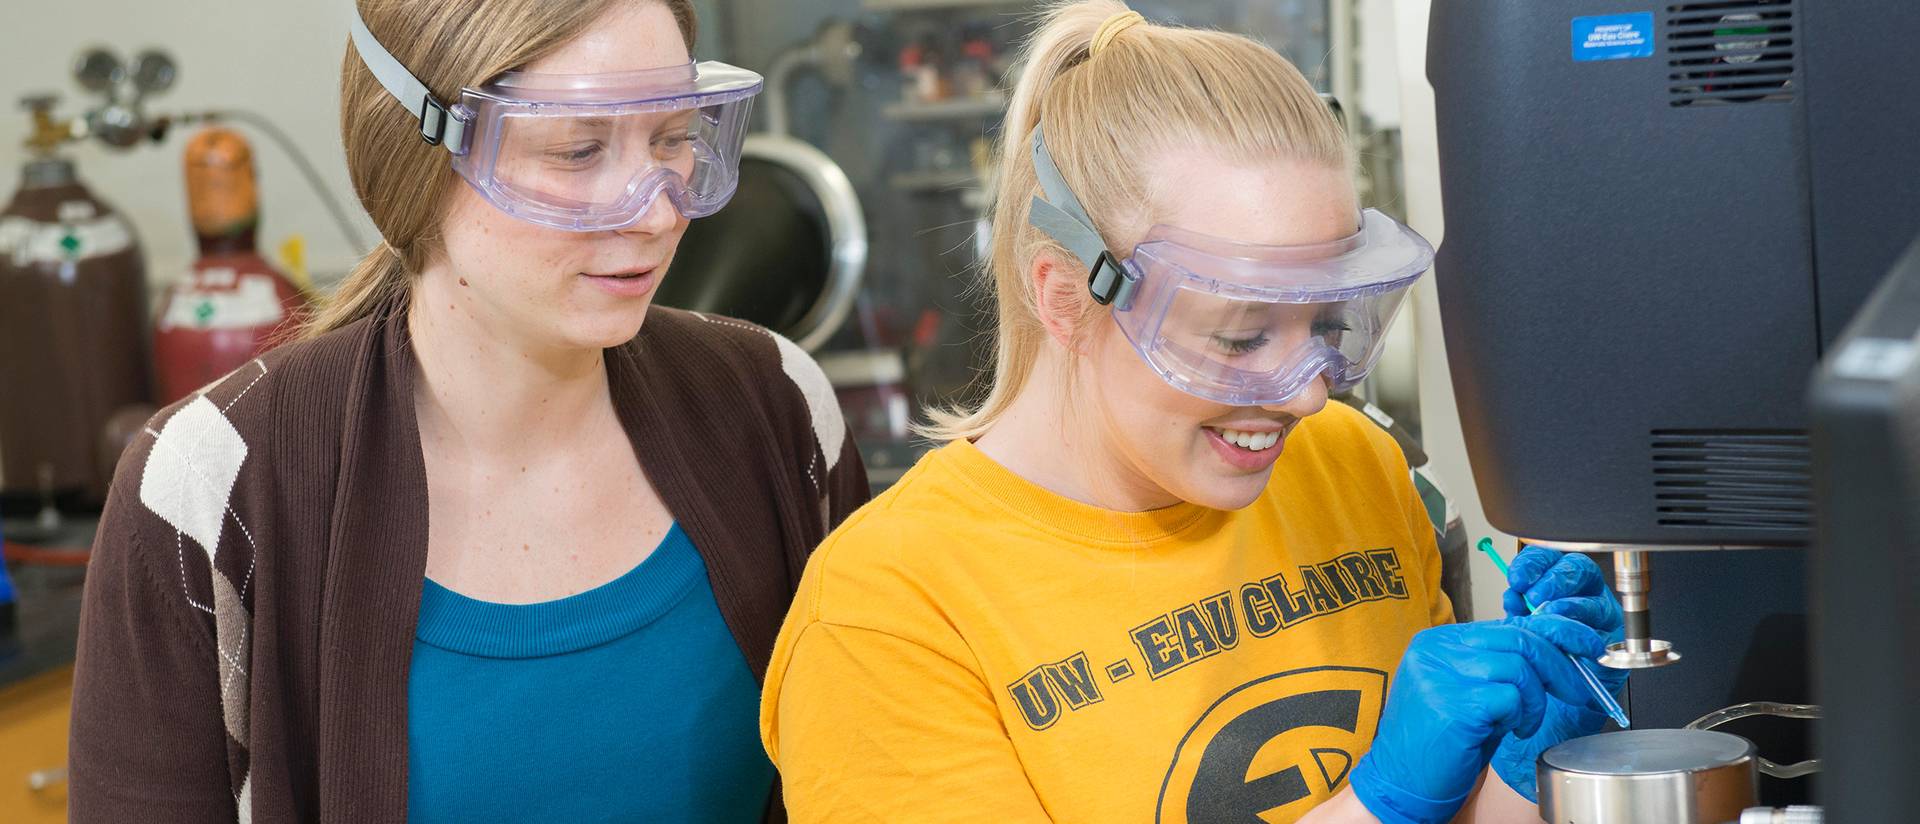 Dr. Liz Glogowski (left) works with materials science student Liz Stubbs on measuring the viscosity of polymer samples as part of the UW System Applied Research Grant project. Different viscosities of the polymers are important for enhanced oil recovery.